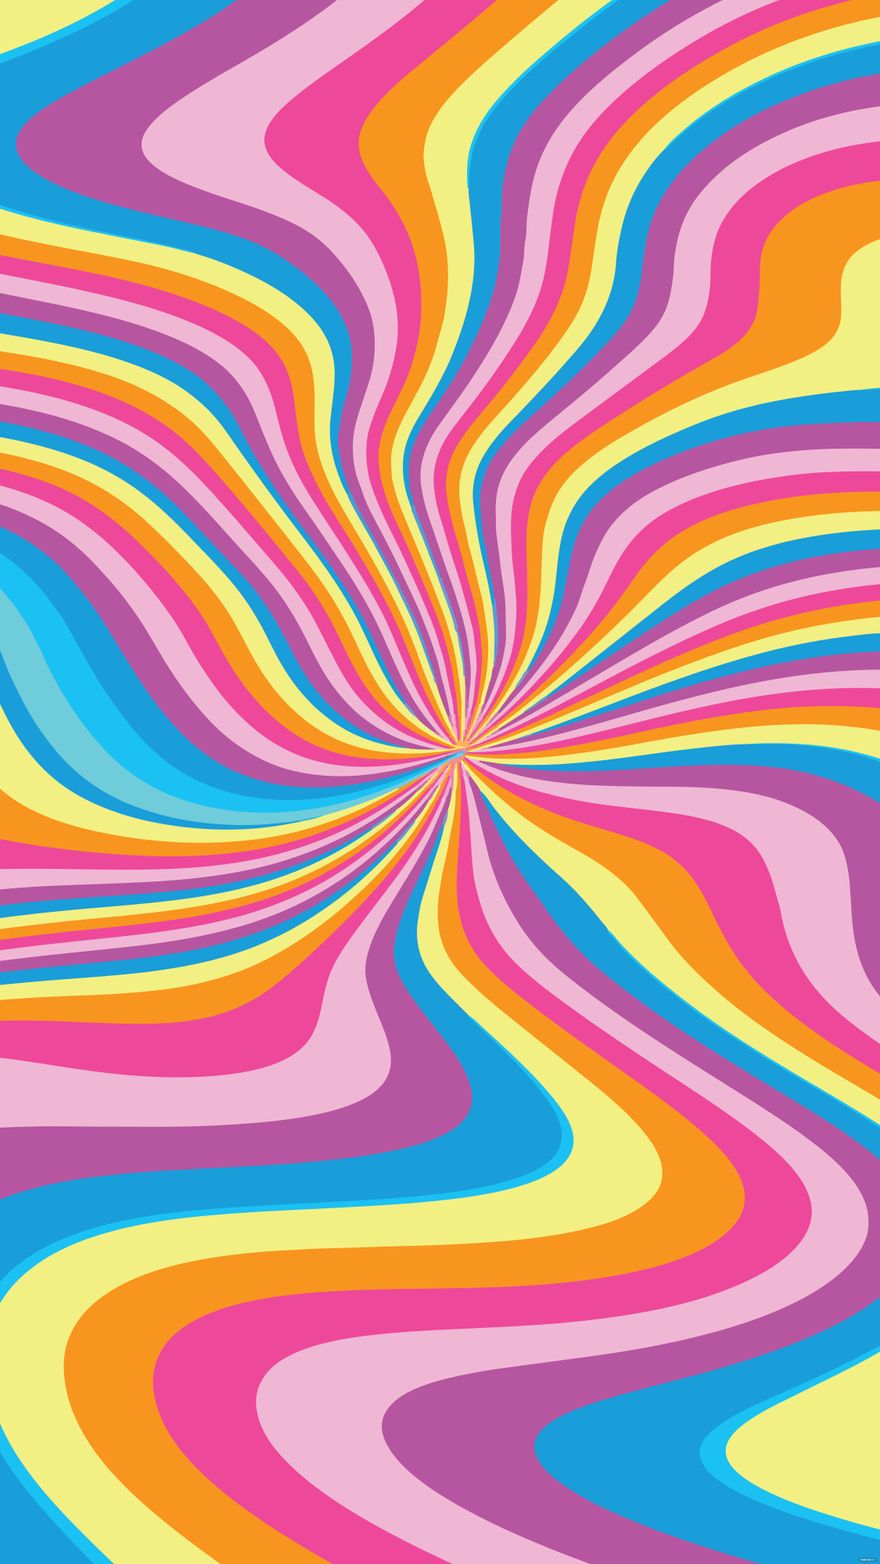 Free Trippy Iphone Background - Download in Illustrator, EPS, SVG